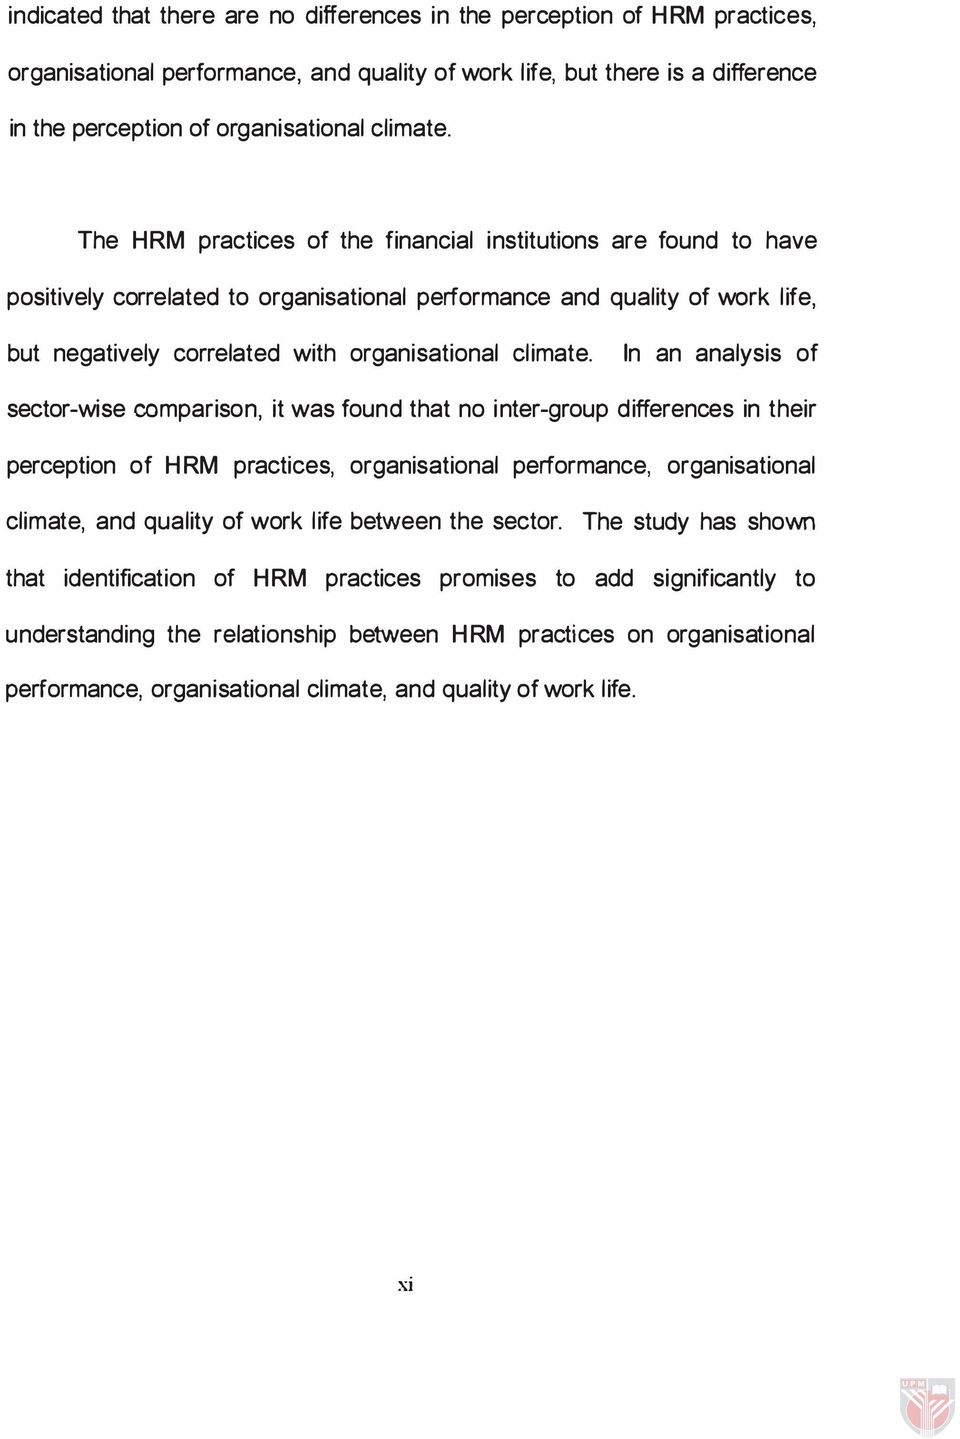 In an analysis of sector-wise comparison, it was found that no inter-group differences in their perception of HRM practices, organisational performance, organisational climate, and quality of work